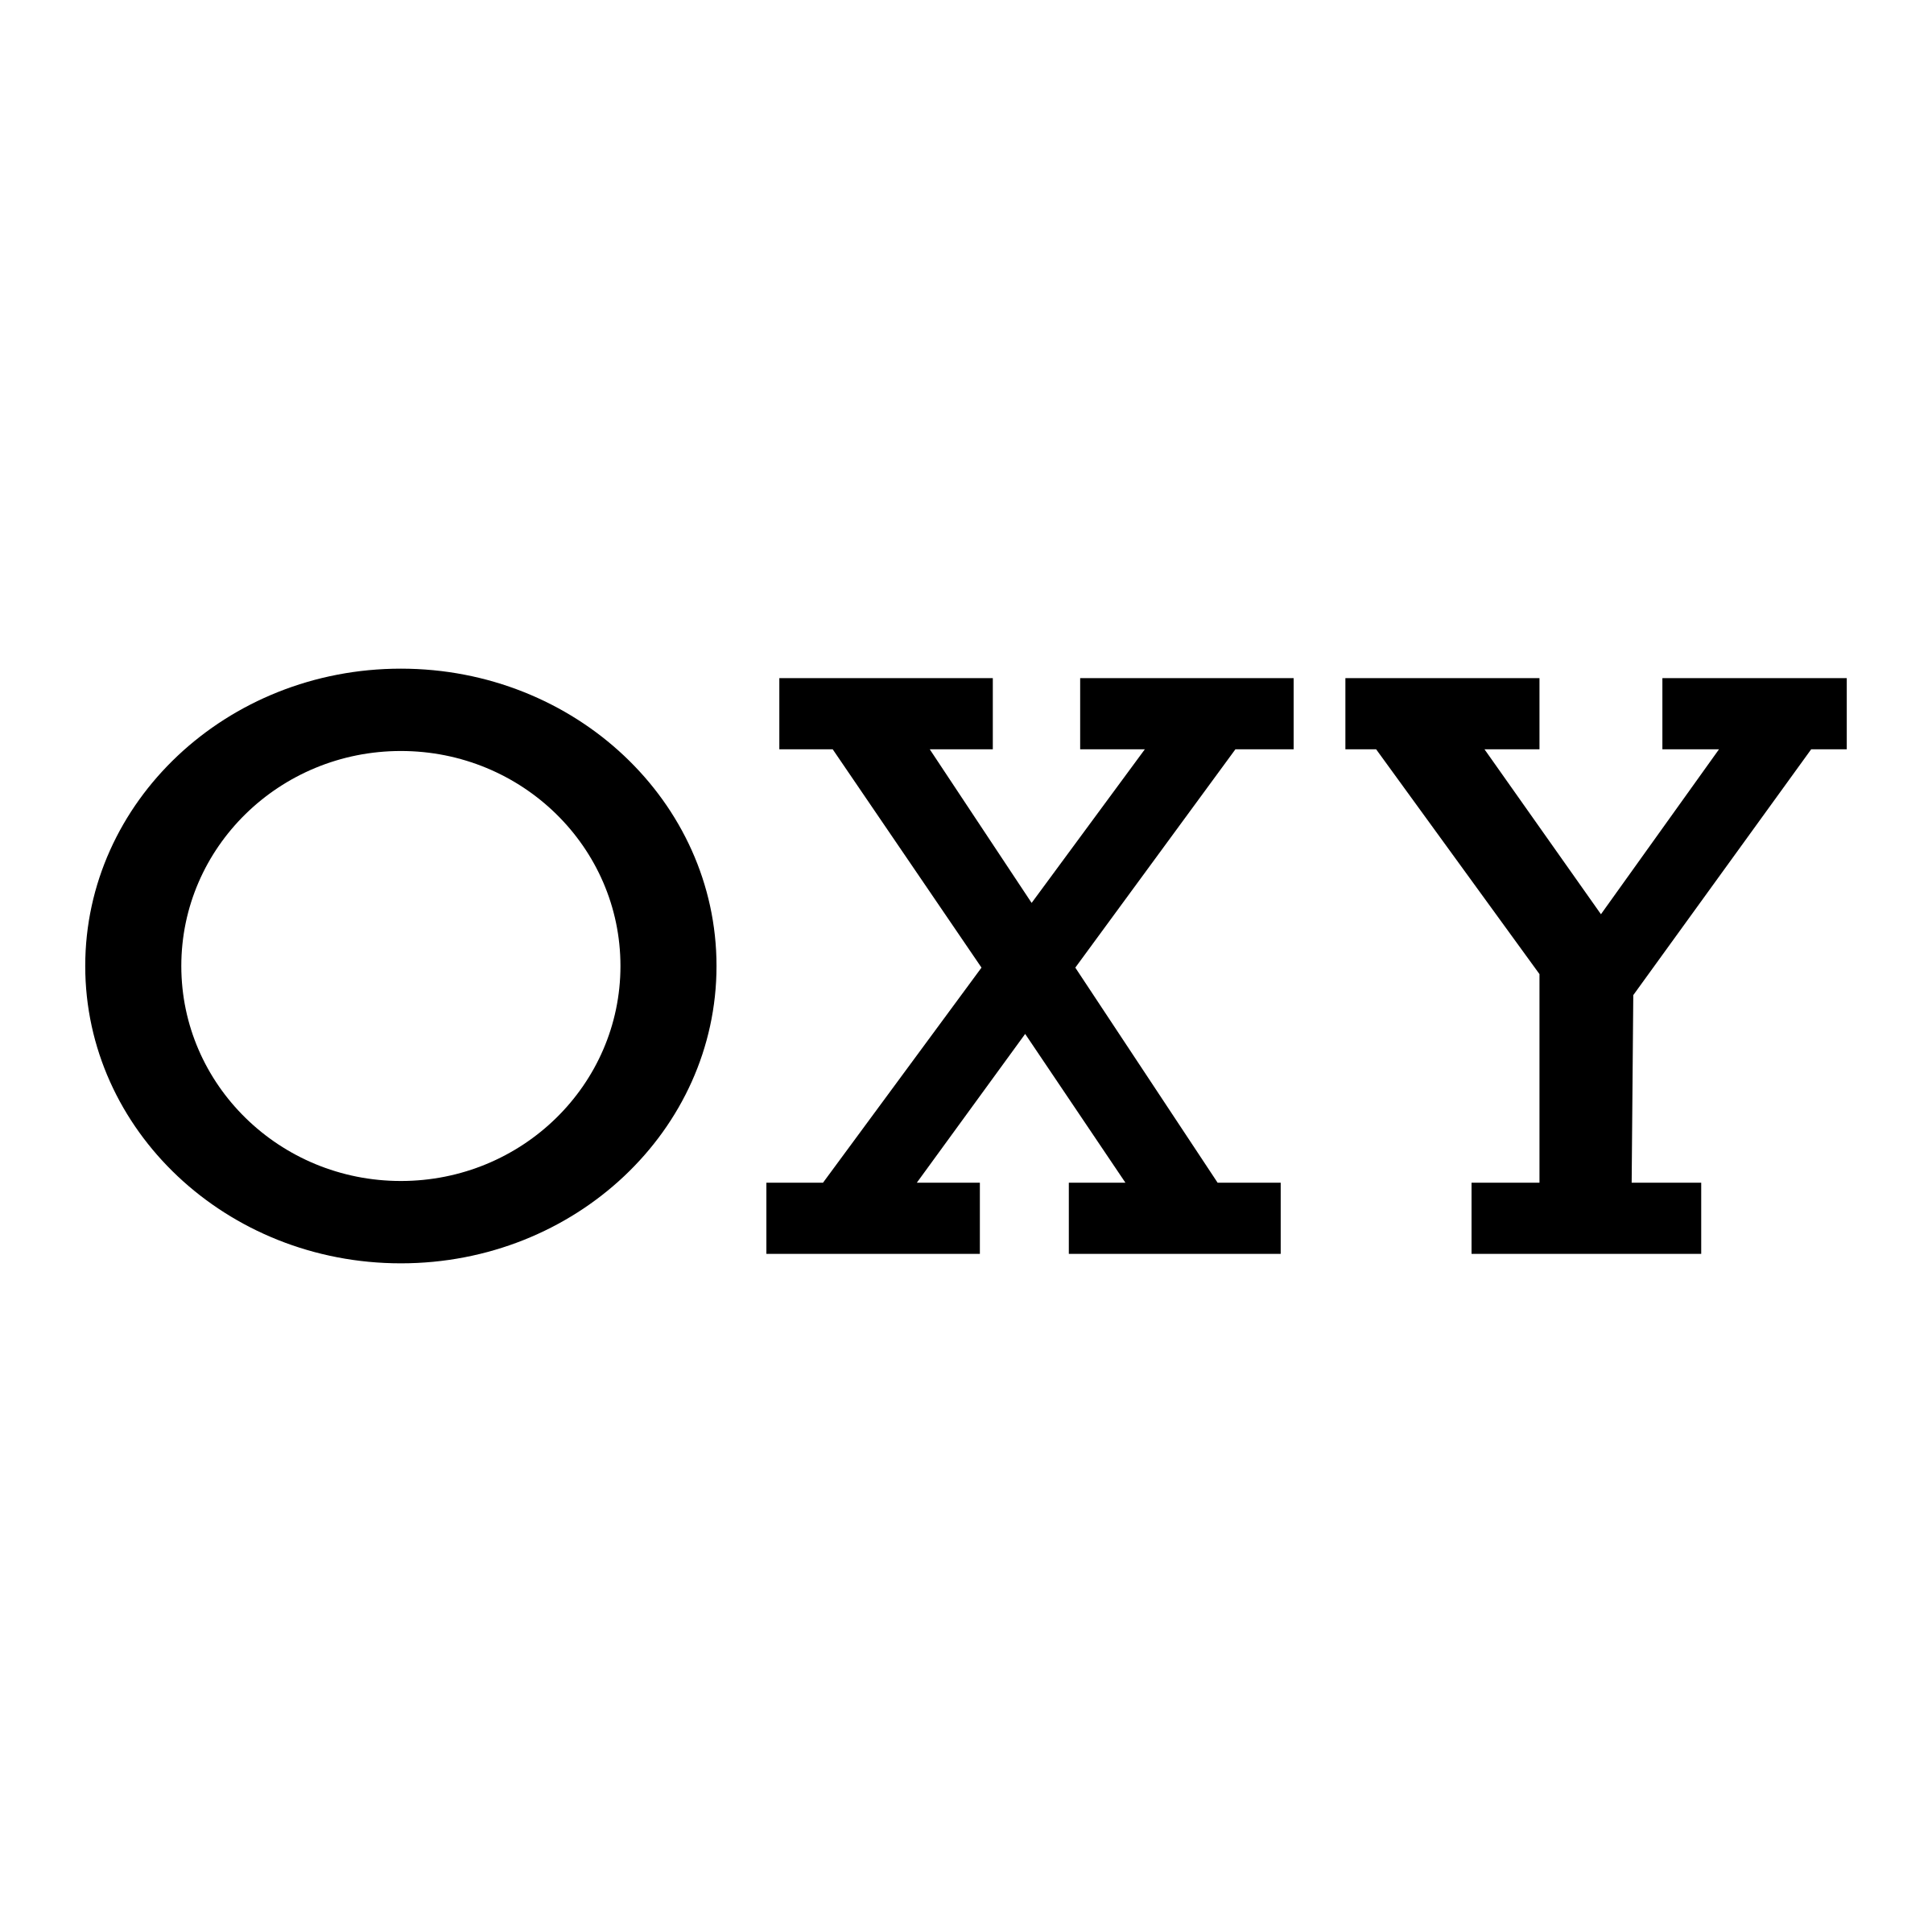 Oxy Logo - Oxy Logo PNG Transparent & SVG Vector